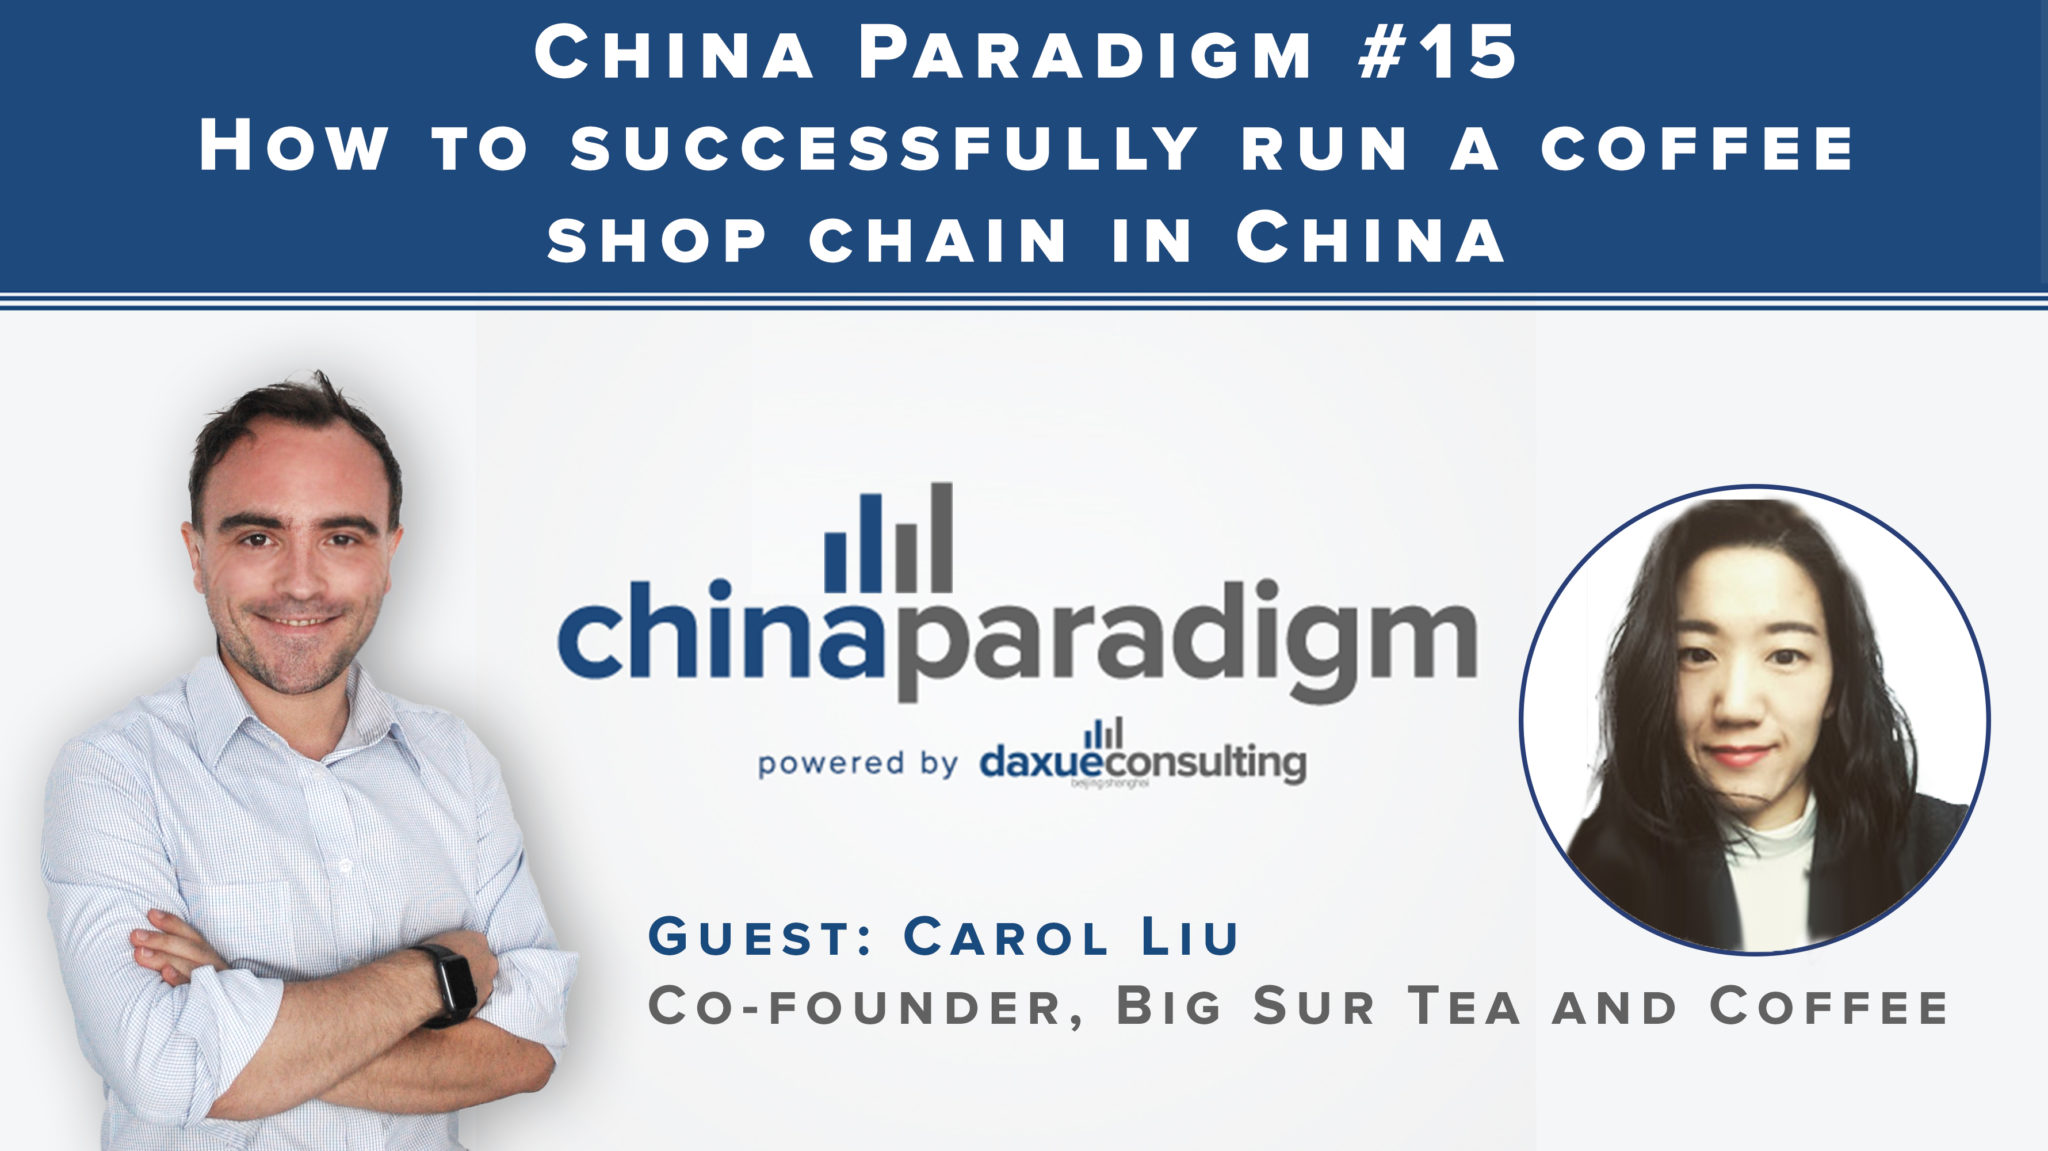 [Podcast] China paradigm #15: How to successfully run a coffee shop chain in China